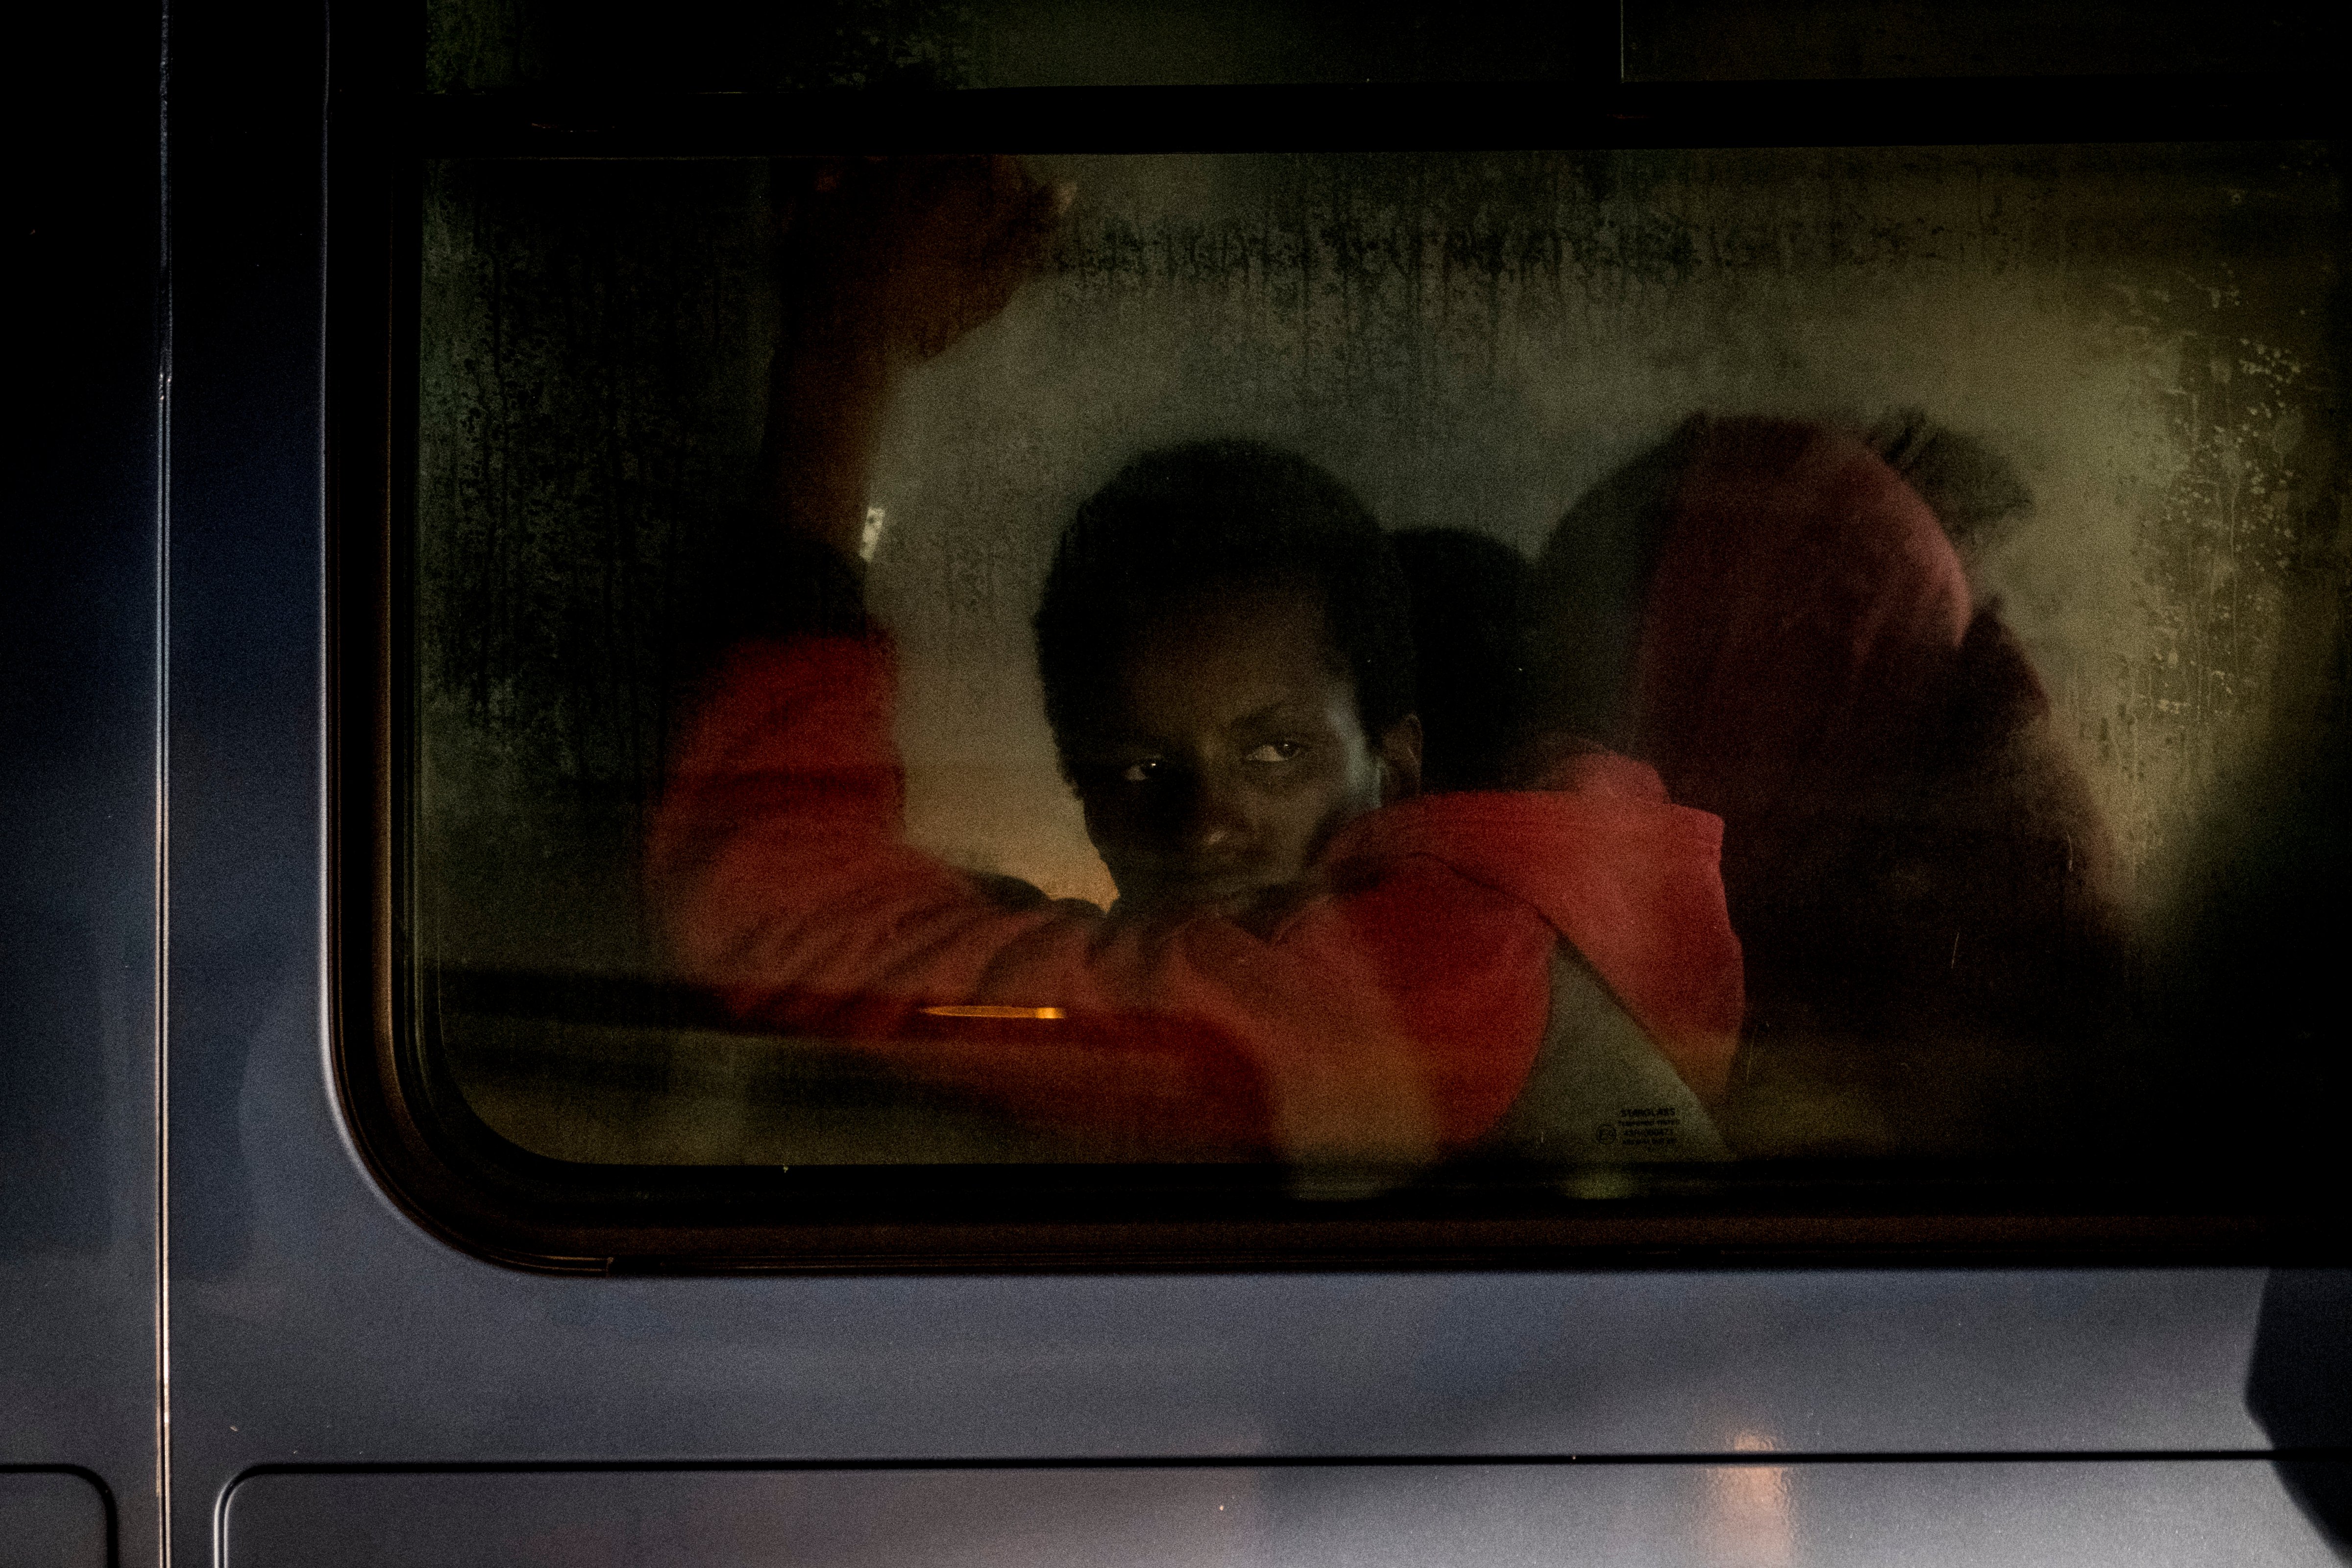 A migrant inside of a van waiting to be transferred to a center in Malaga, Spain on Nov. 22, 2018. (NurPhoto&mdash;NurPhoto via Getty Images)